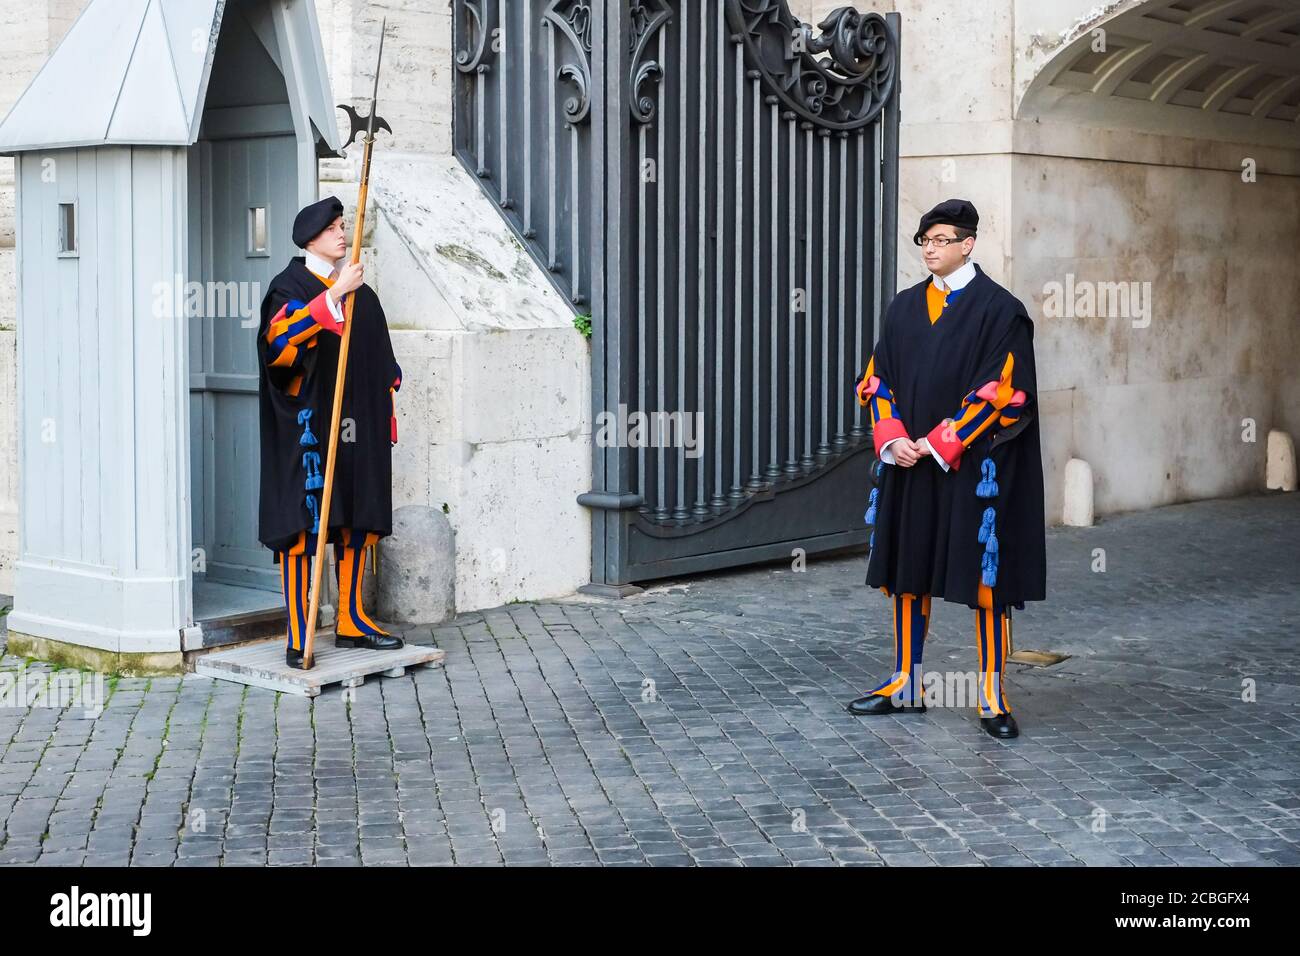 Swiss guard soldier Vatican, Rome, Italy Stock Photo